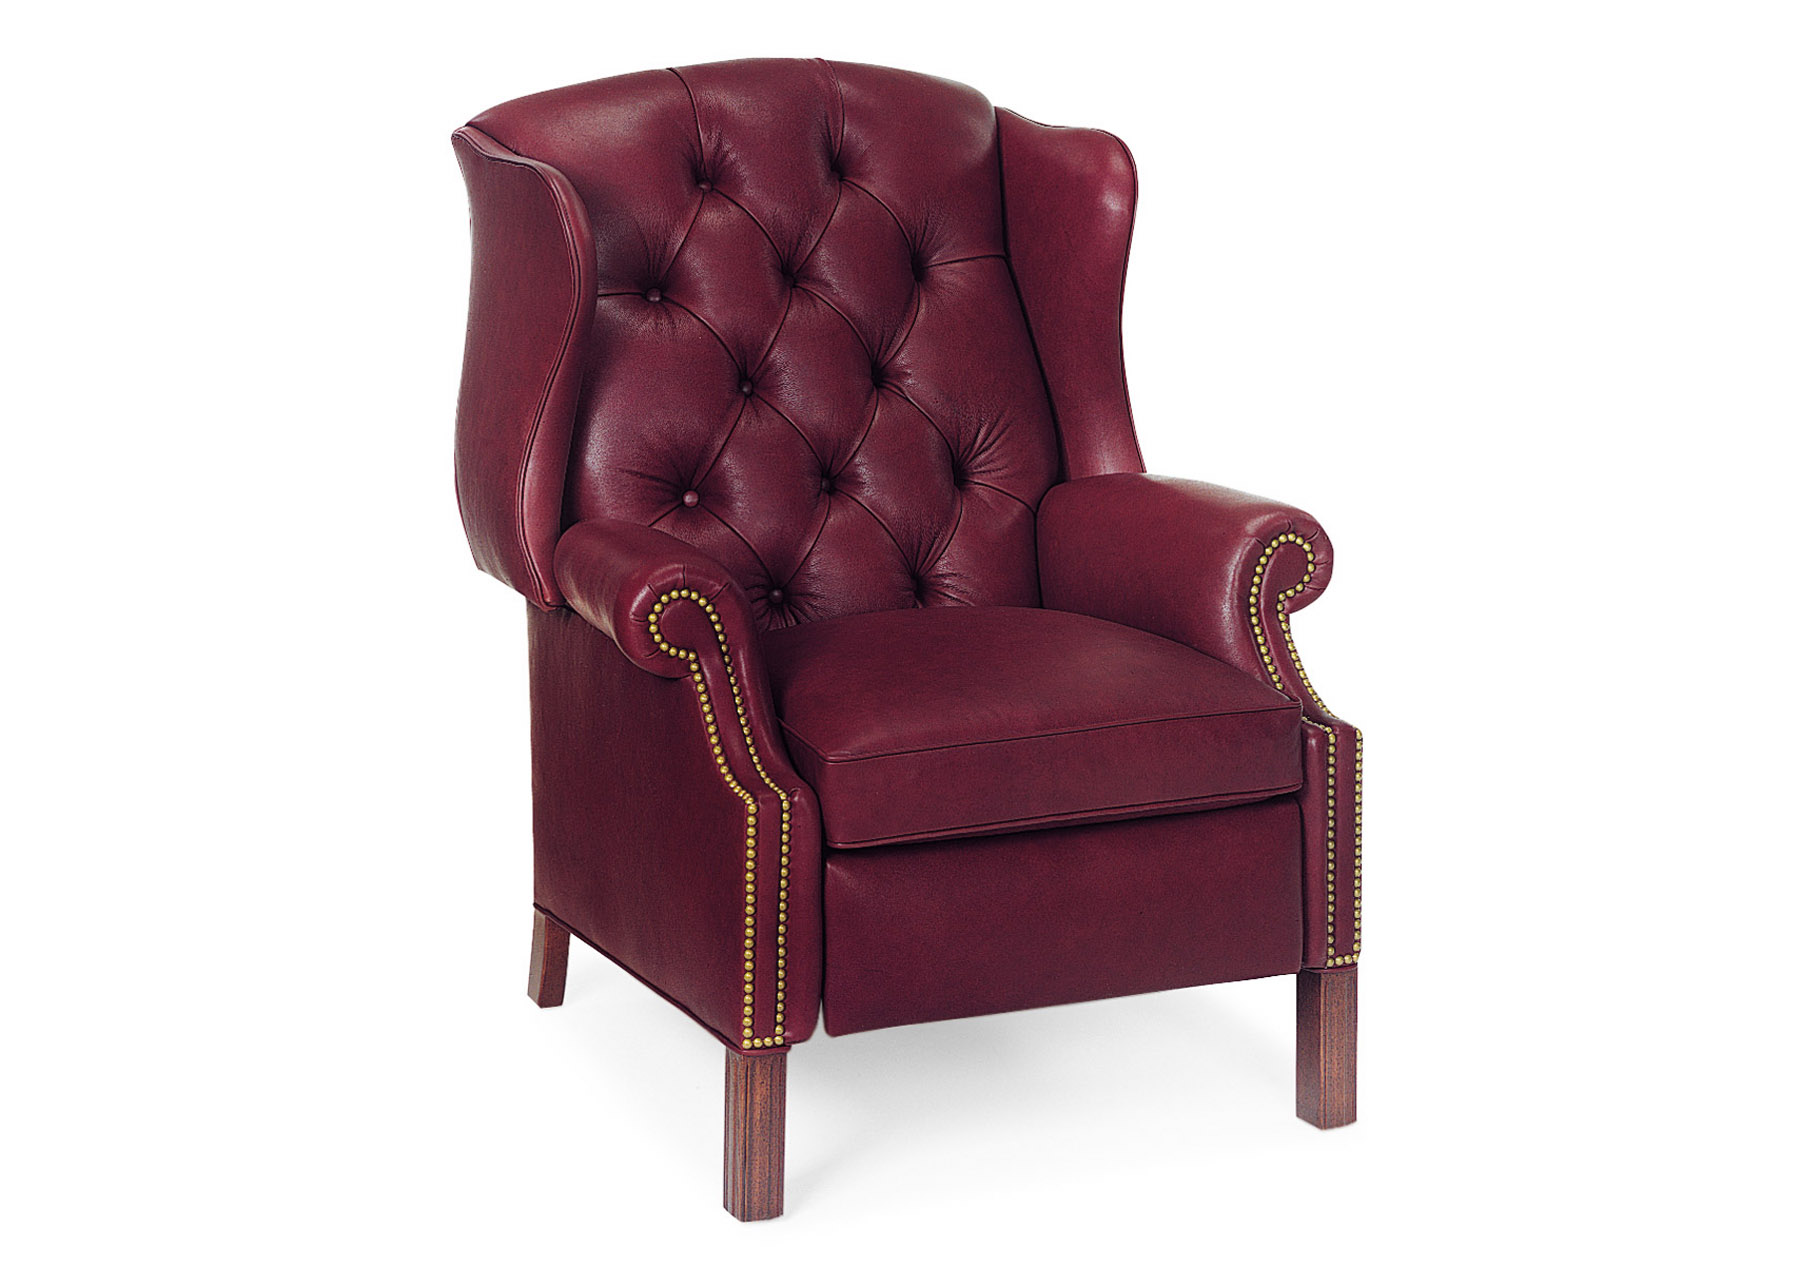 BROWNING TUFTED WING CHAIR RECLINER